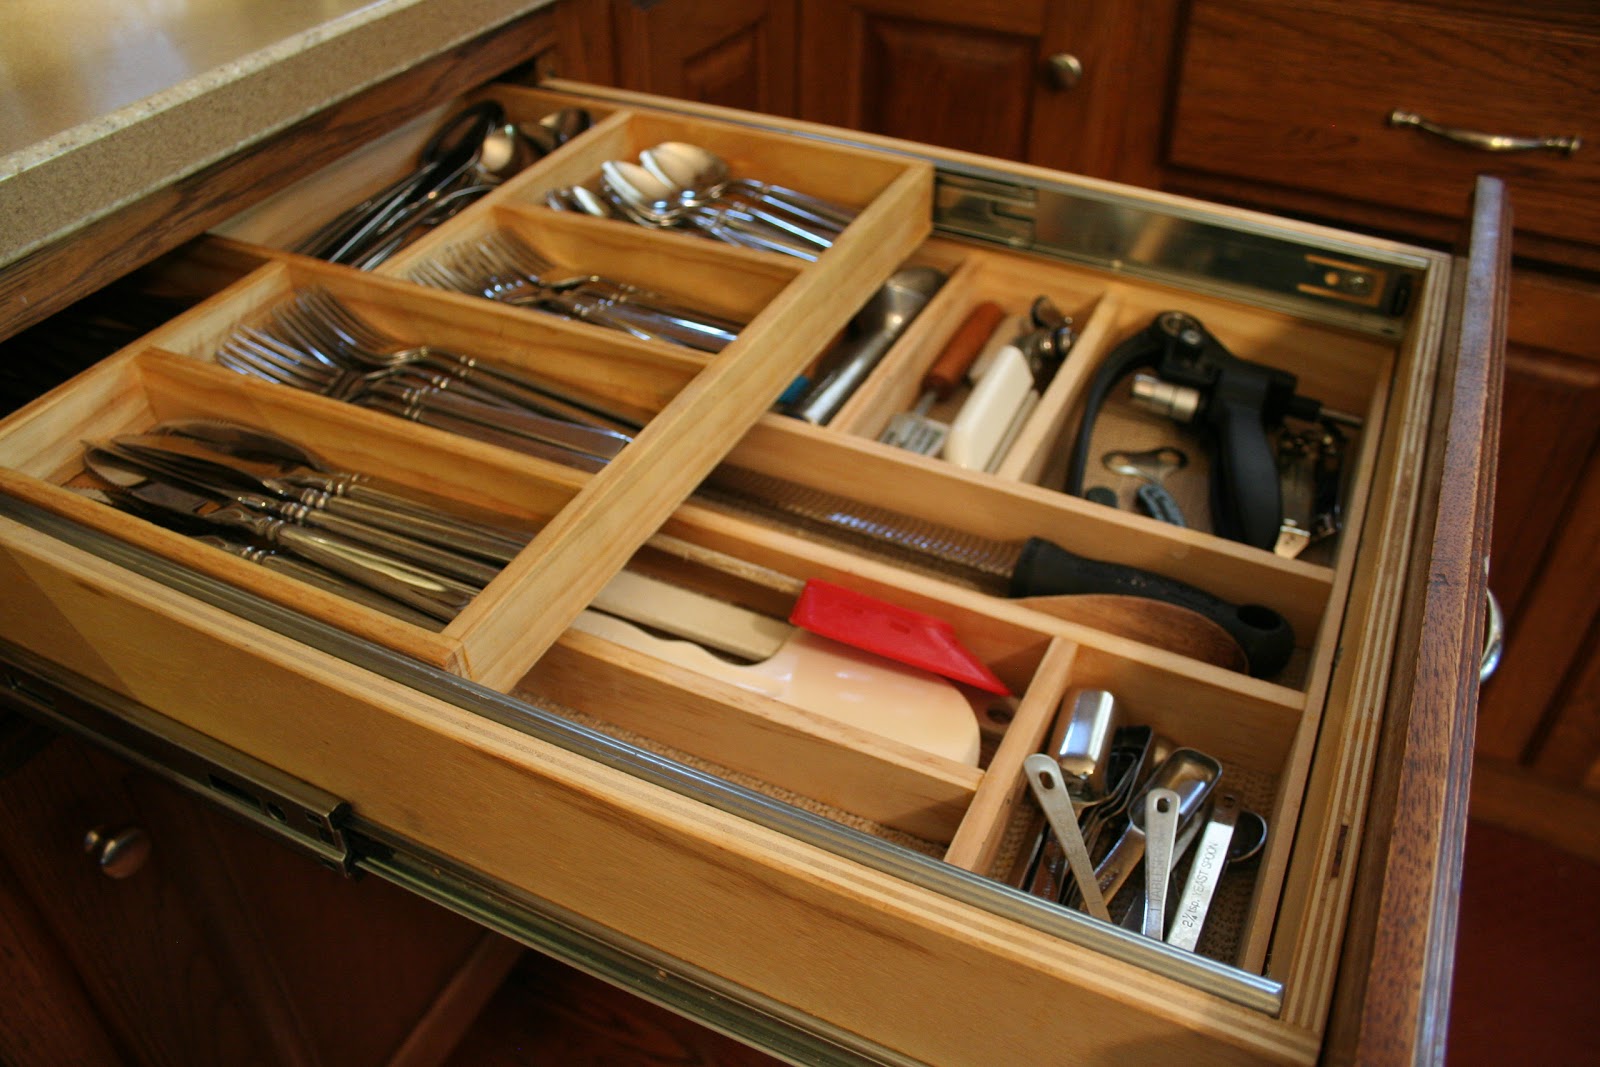 Make the most of your drawers